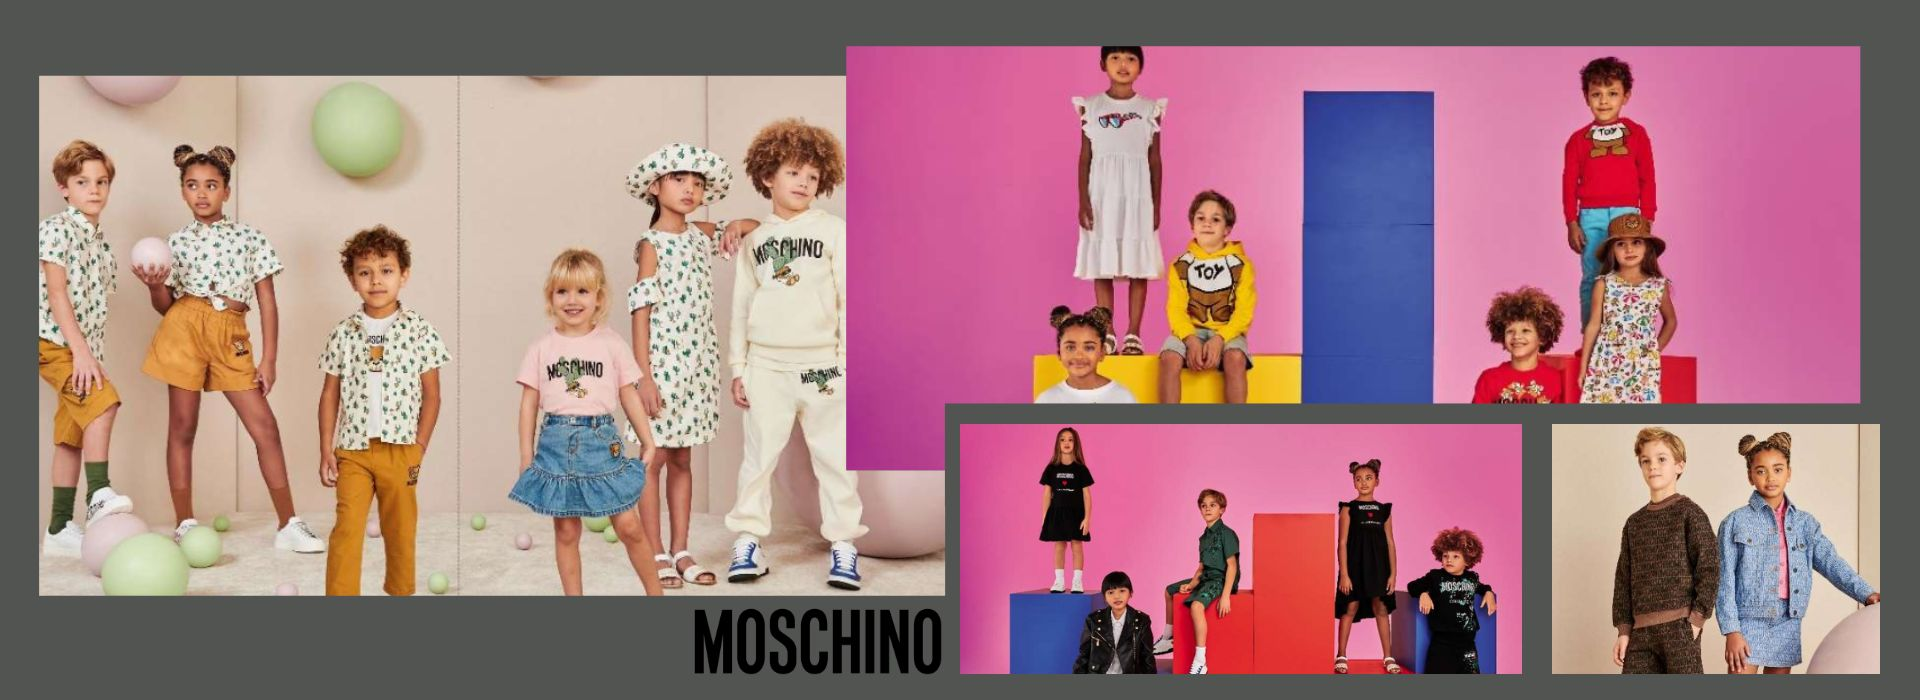 Moschino Kids Clothes